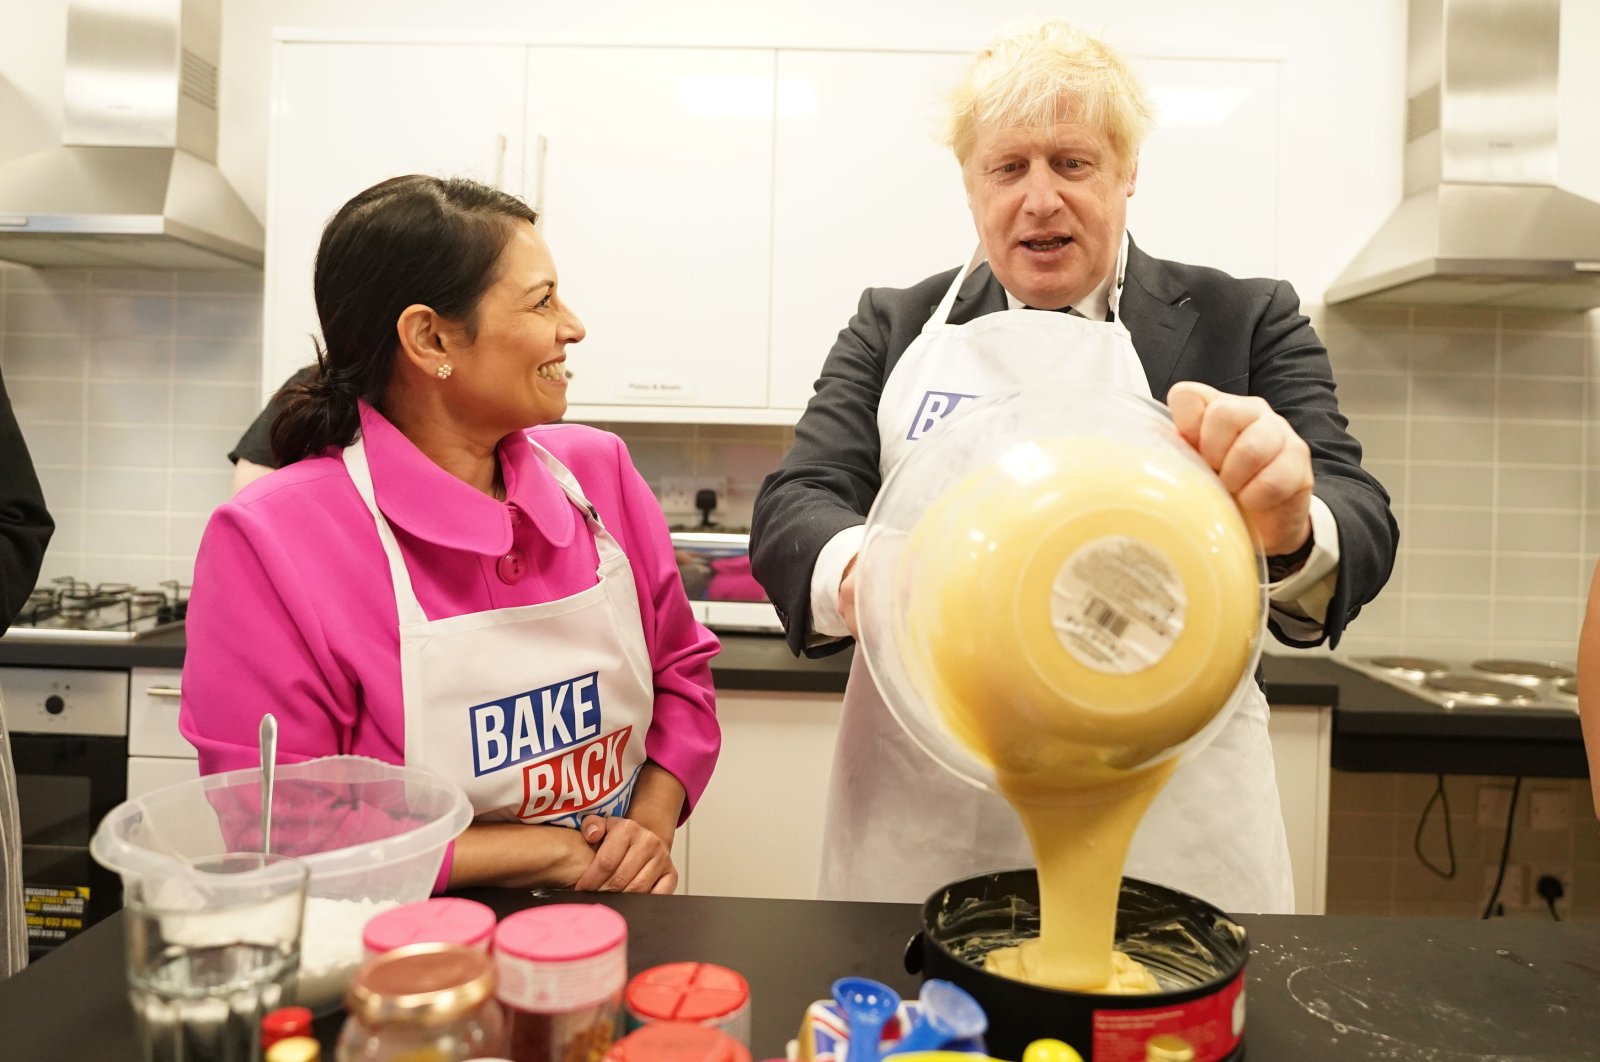 Britain's Prime Minister Boris Johnson and Home Secretary Priti Patel try baking during a visit to HideOut Youth Zone, in Manchester, England, Oct. 3, 2021. (AP Photo)